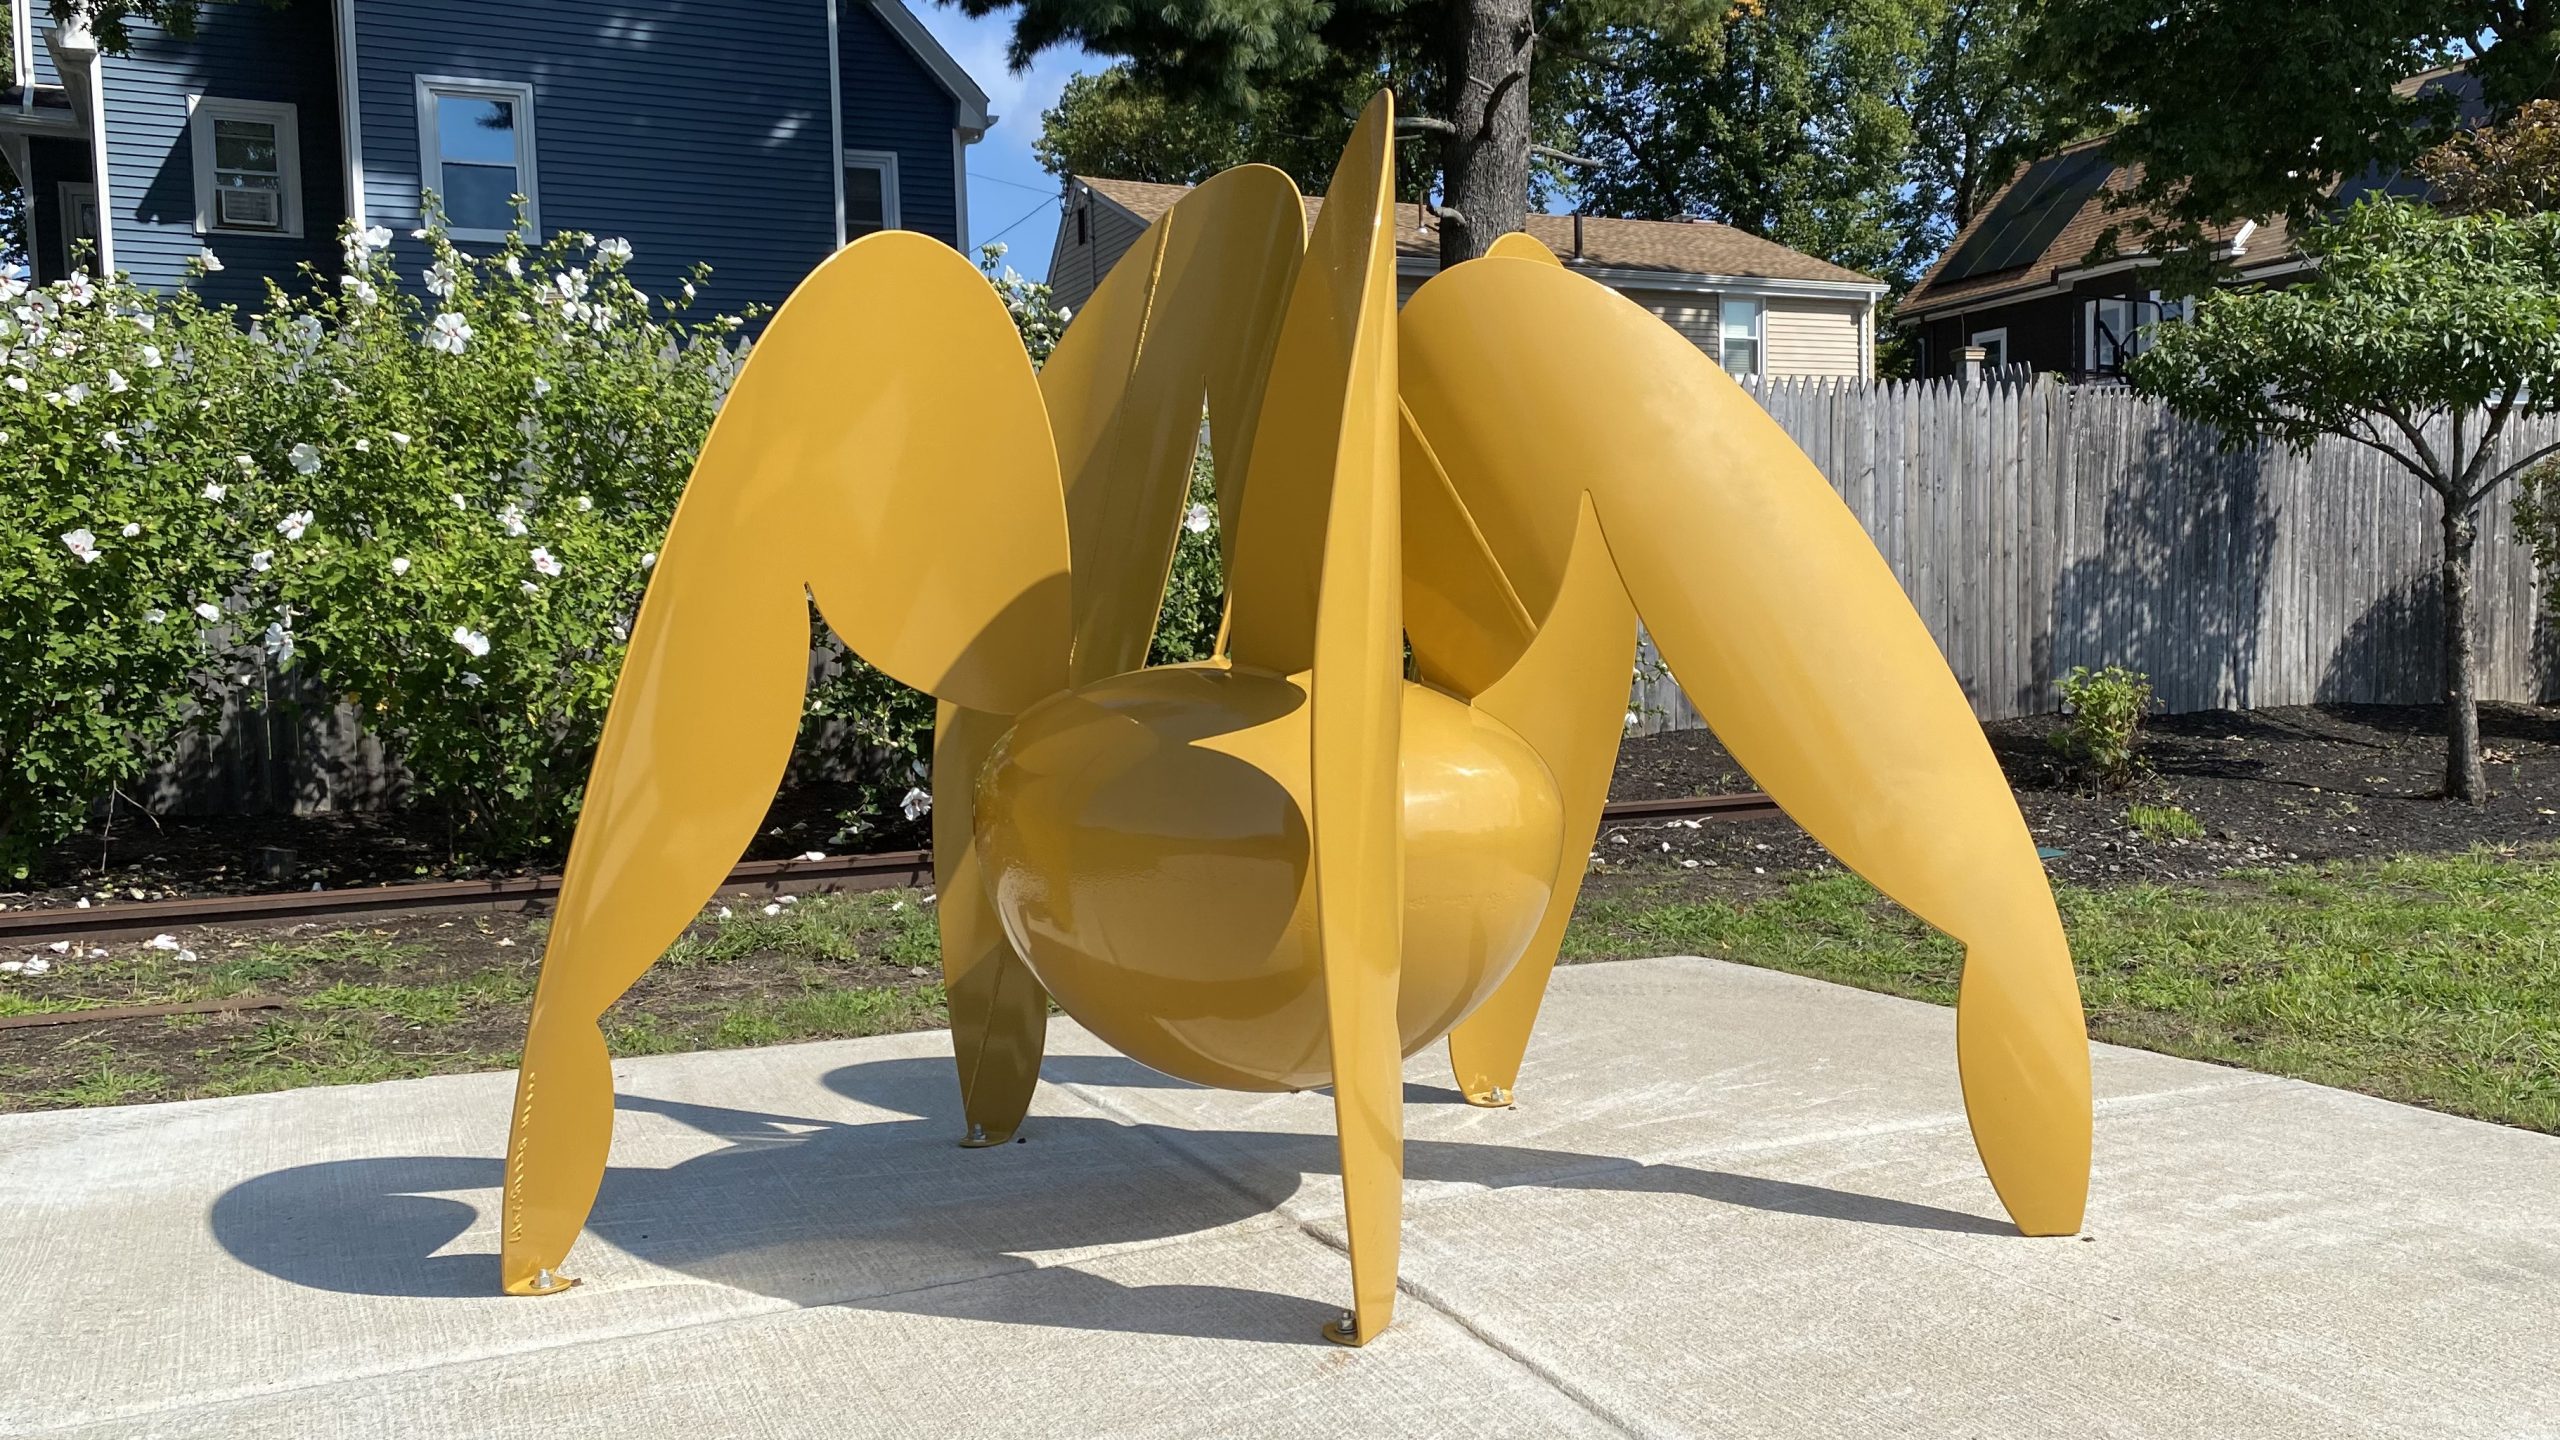 Multi-use trail seating sculptures